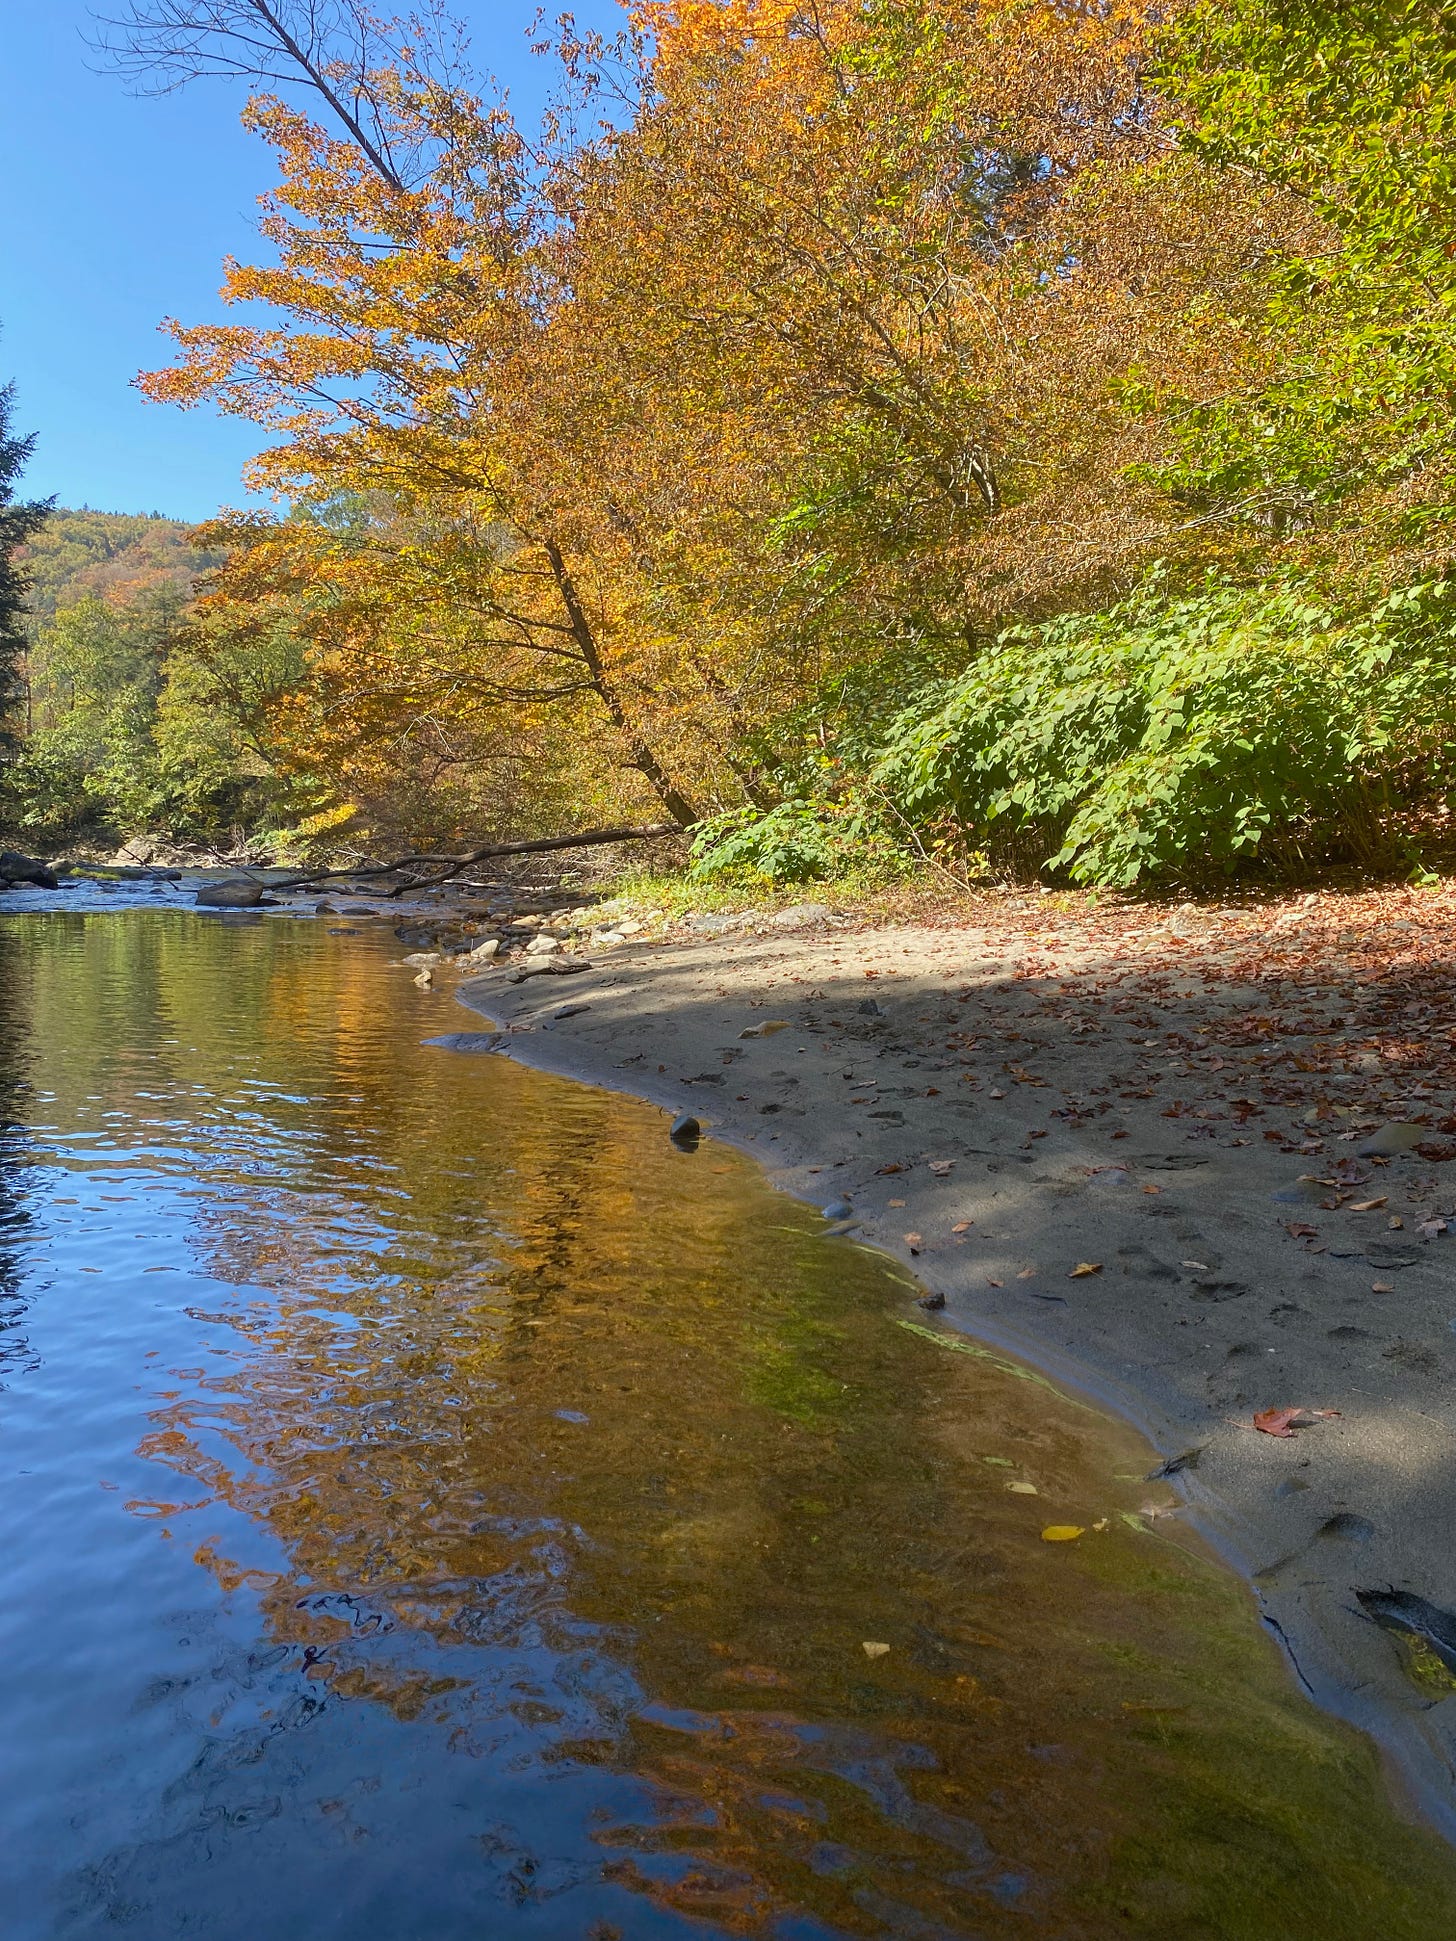 A sandy beach along a still river. The golden trees along the bank cast an orange reflection on the water.  